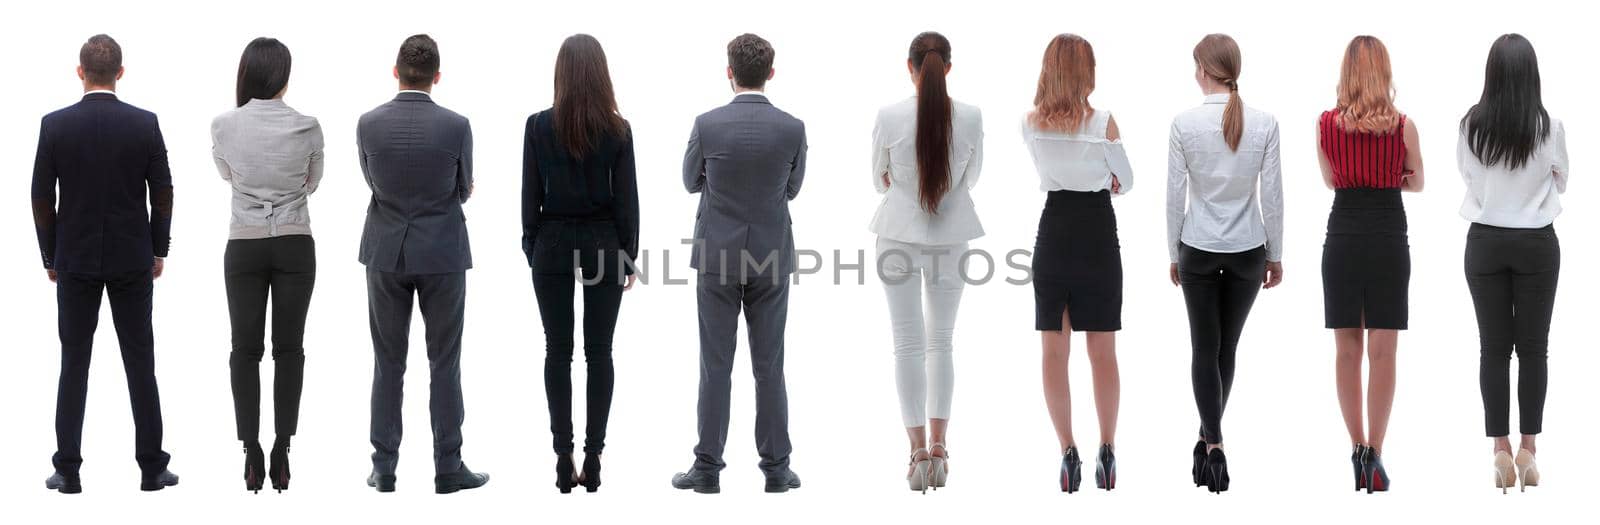 rear view. business team looking forward. isolated on white background